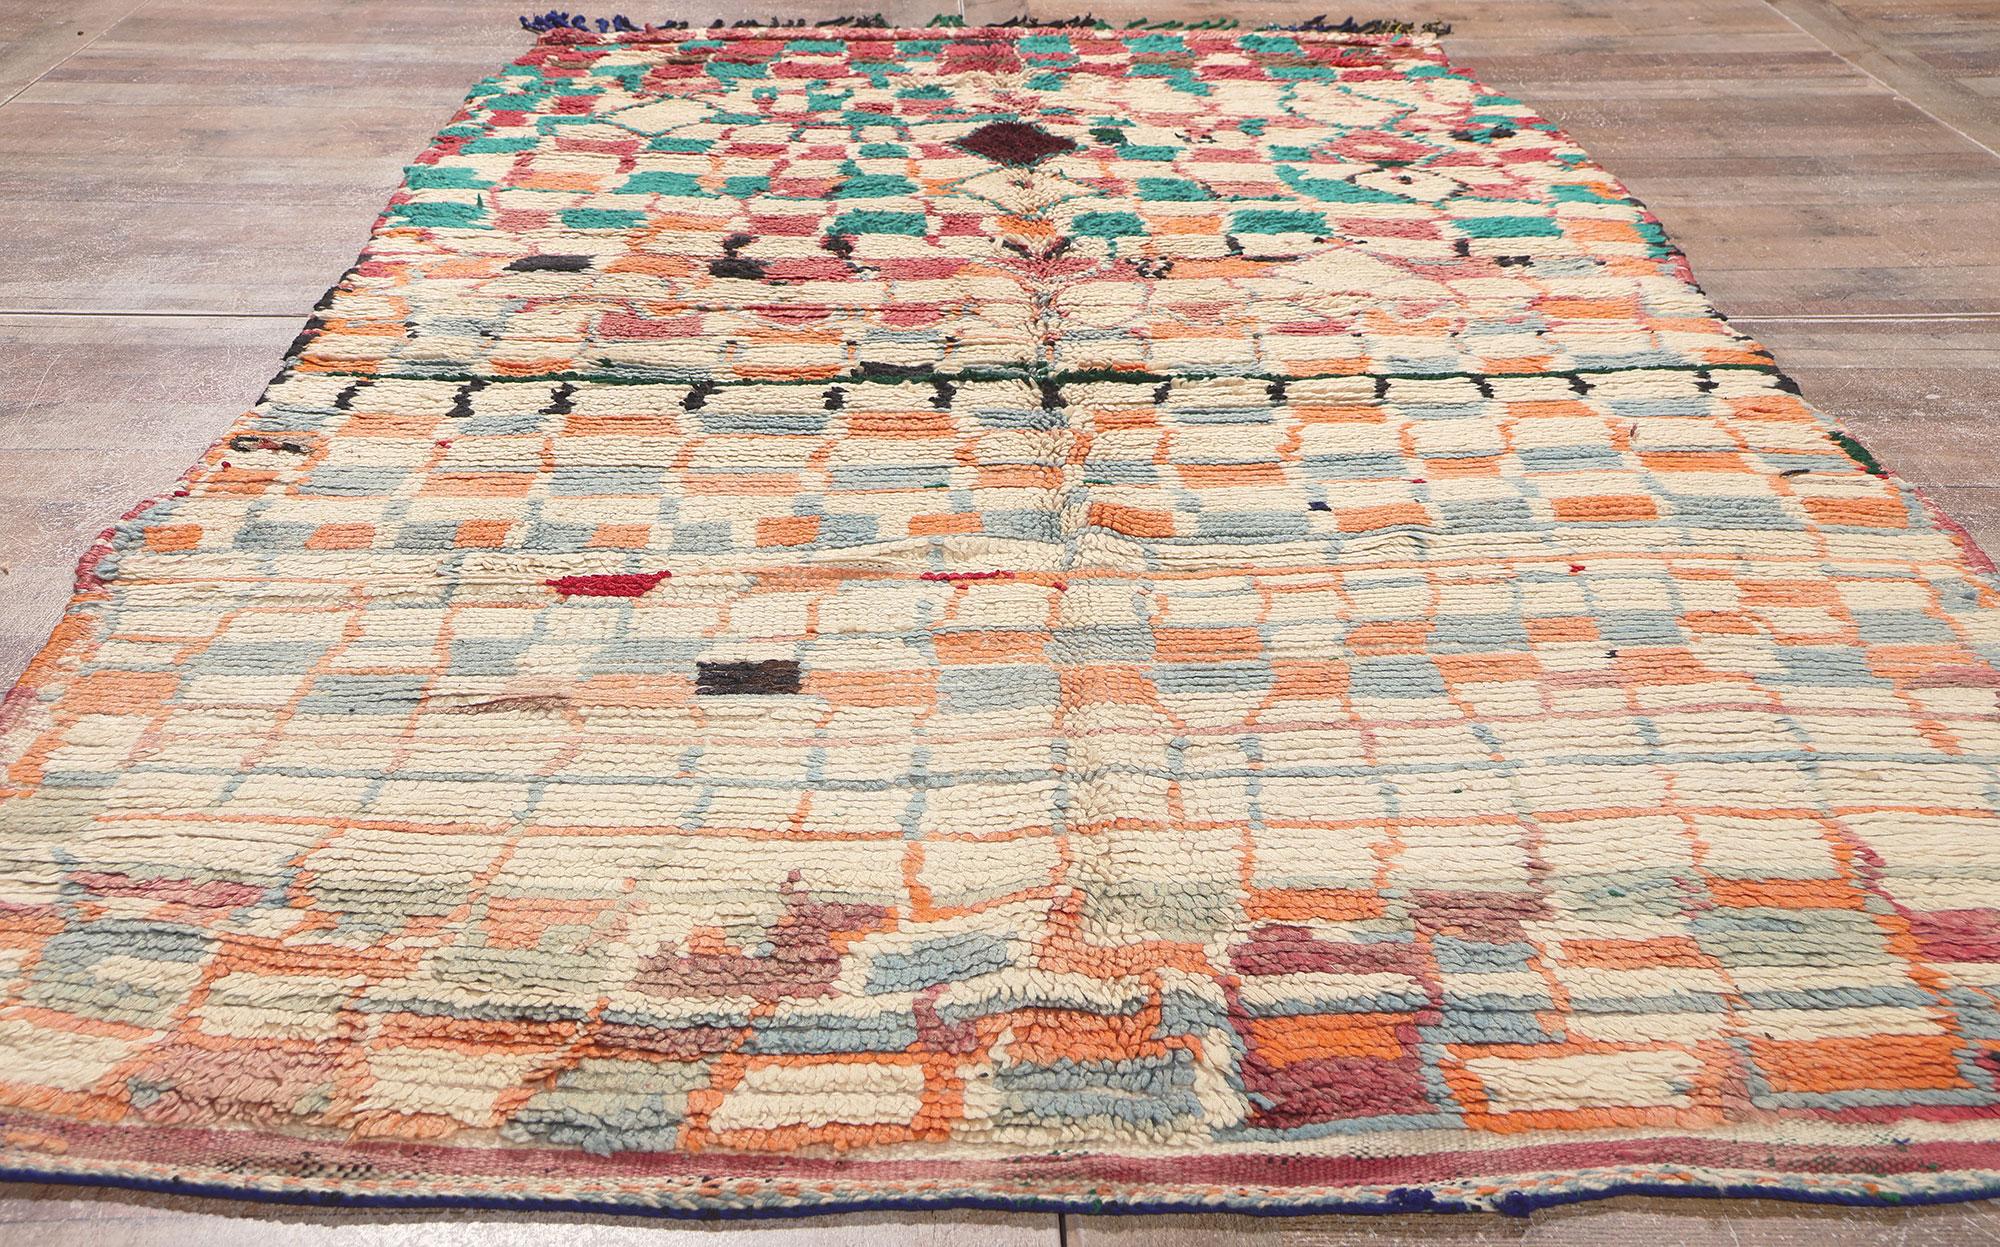 Vintage Moroccan Azilal Rug, Midcentury Modern Meets Cozy Bohemian For Sale 1